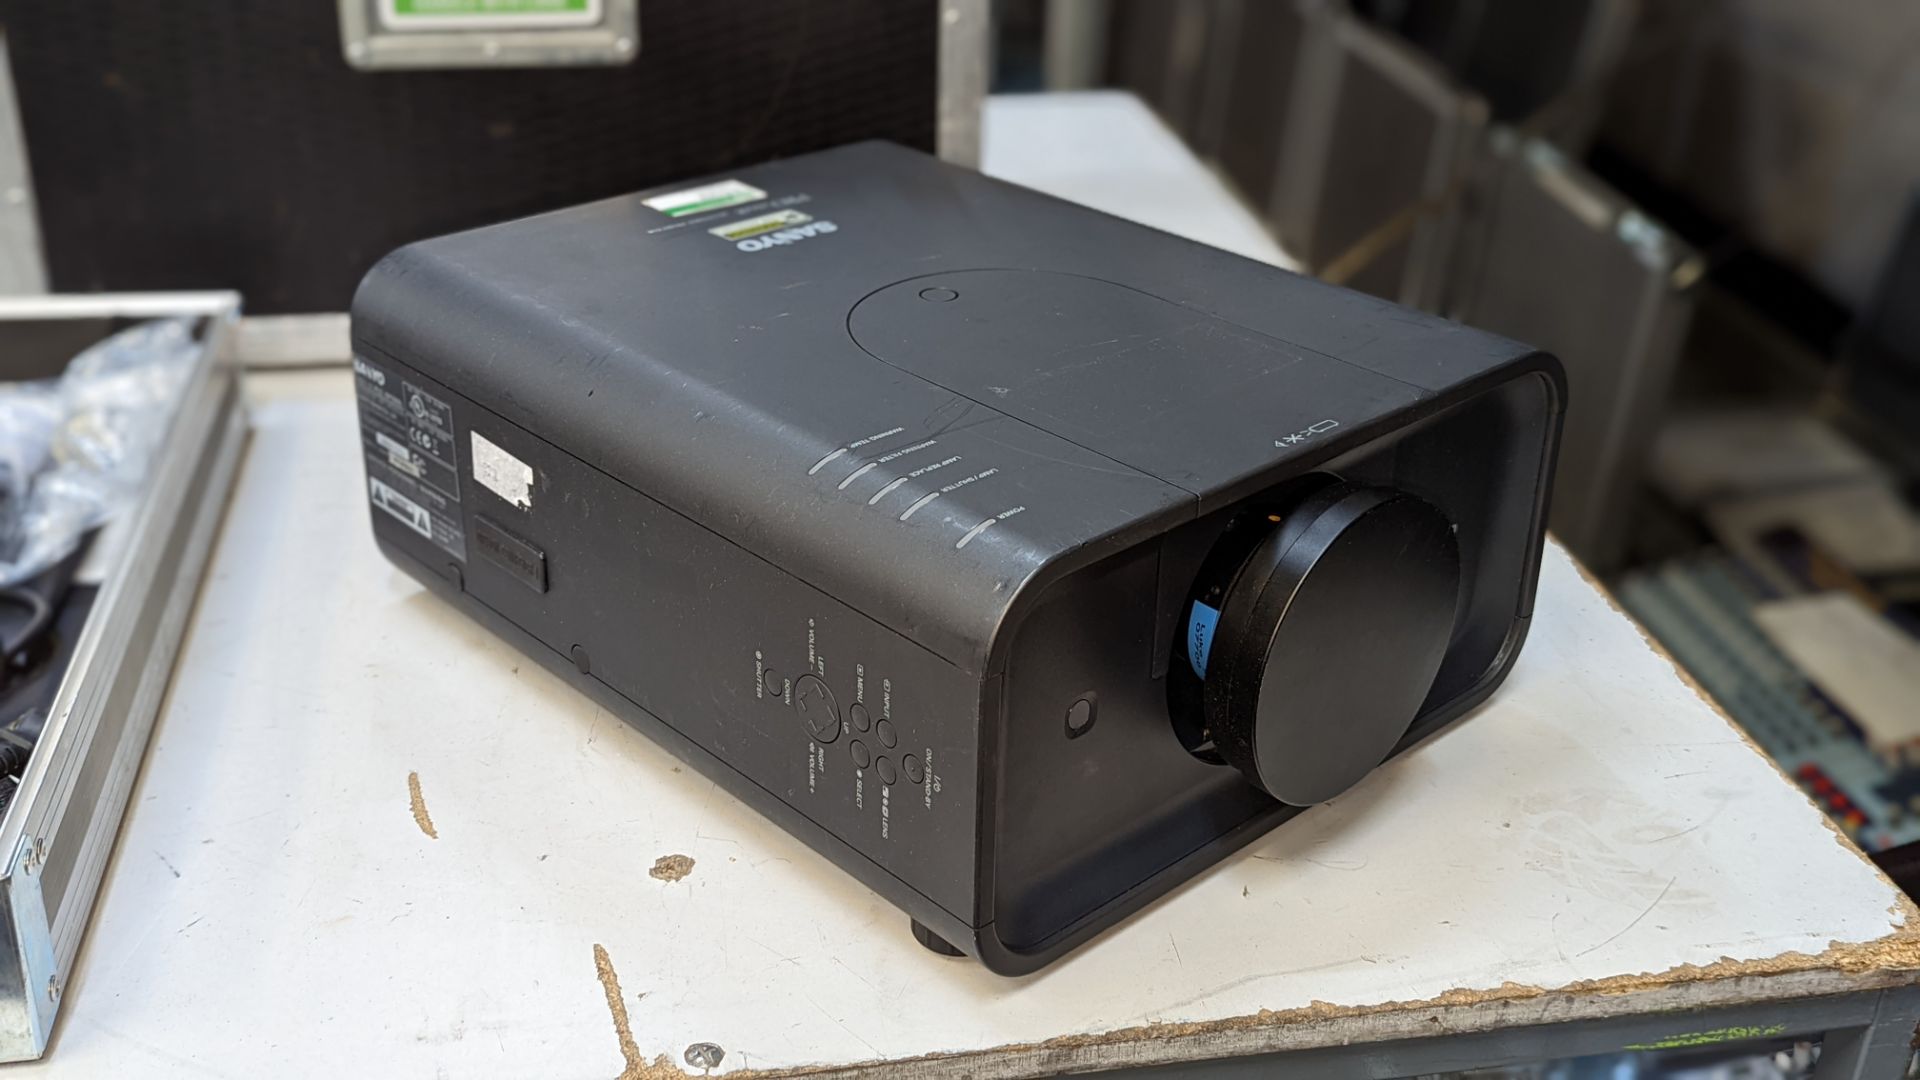 Sanyo PLC model XP-200 LCD projector fitted with 0.8:1 short throw lens. Includes remote & flight ca - Image 4 of 13